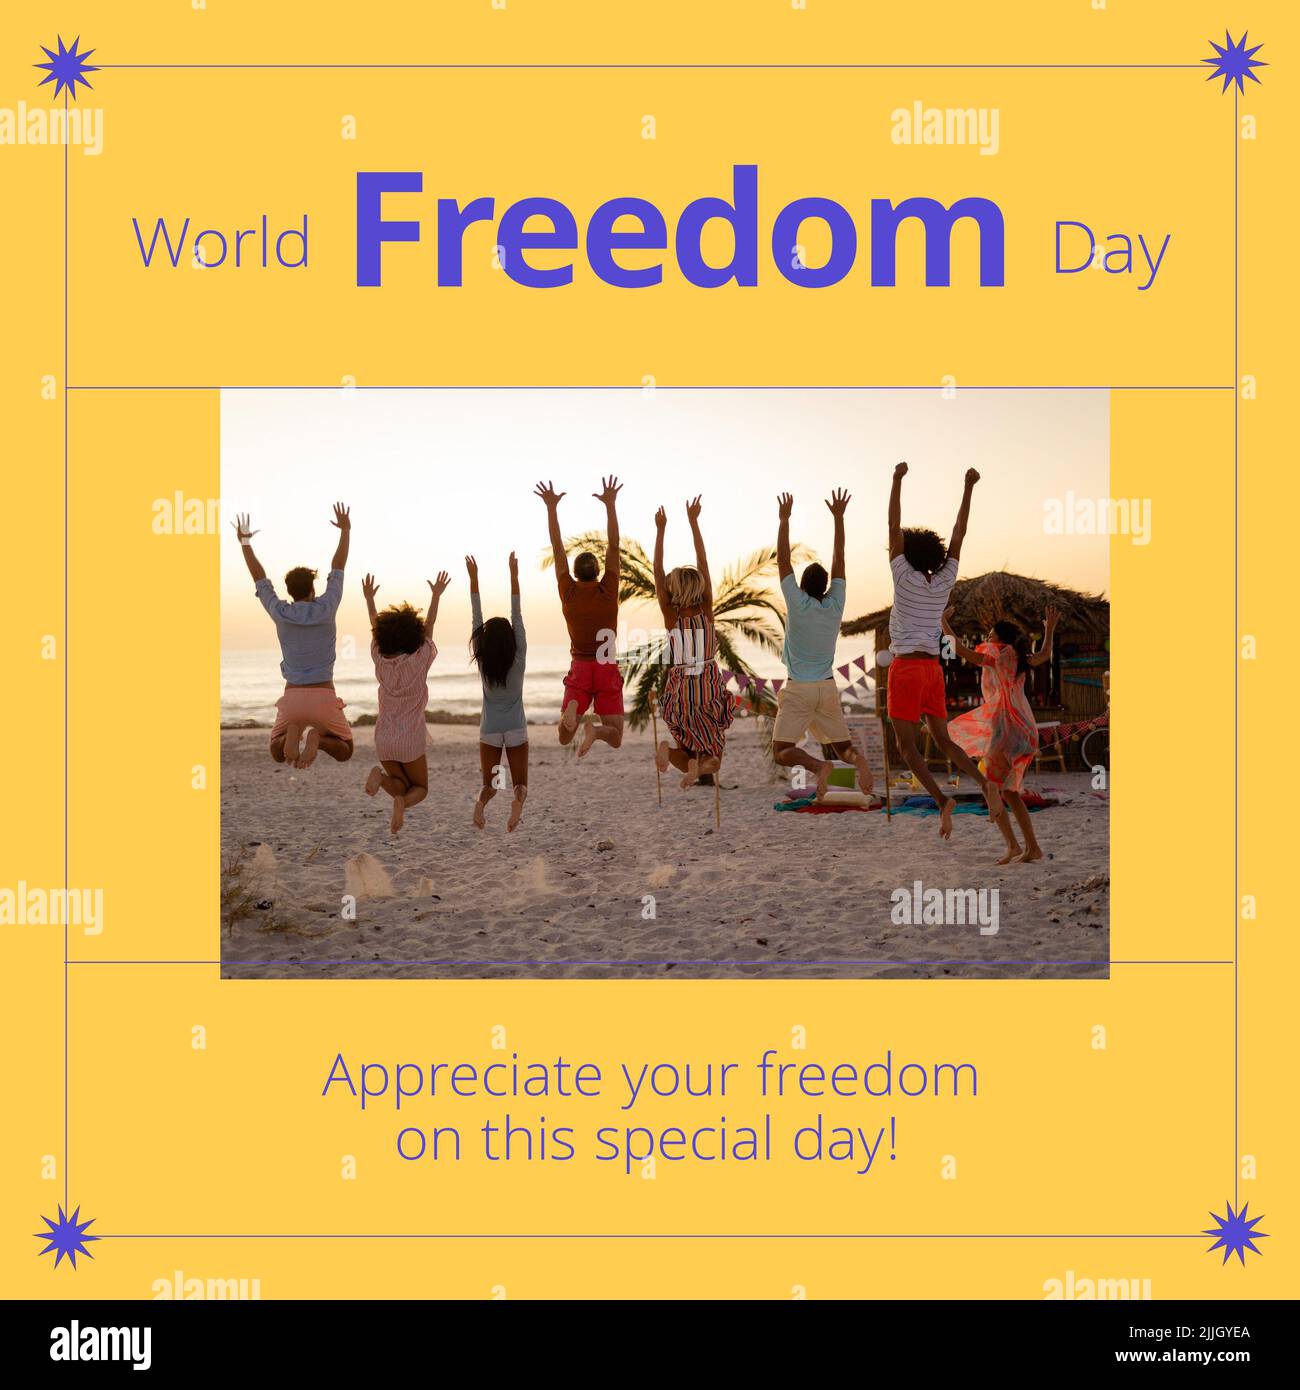 Image of freedom day over happy diverse friends jumping with joy on beach Stock Photo